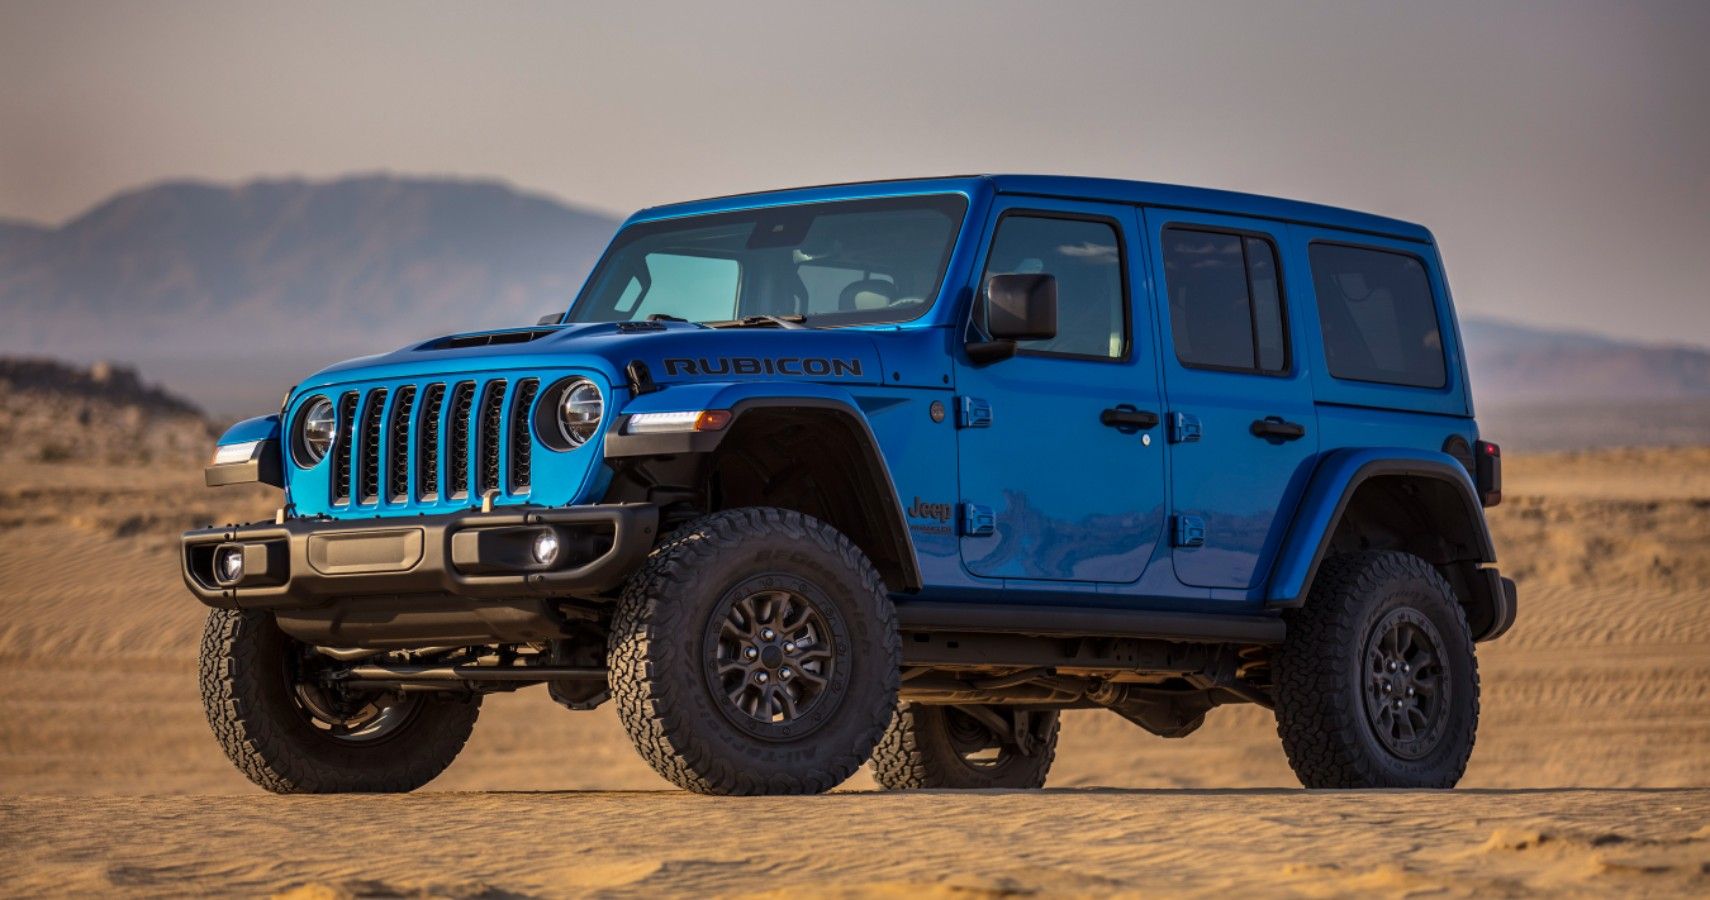 The Rubicon 392 Could Be The Best Jeep Ever But There's One Problem